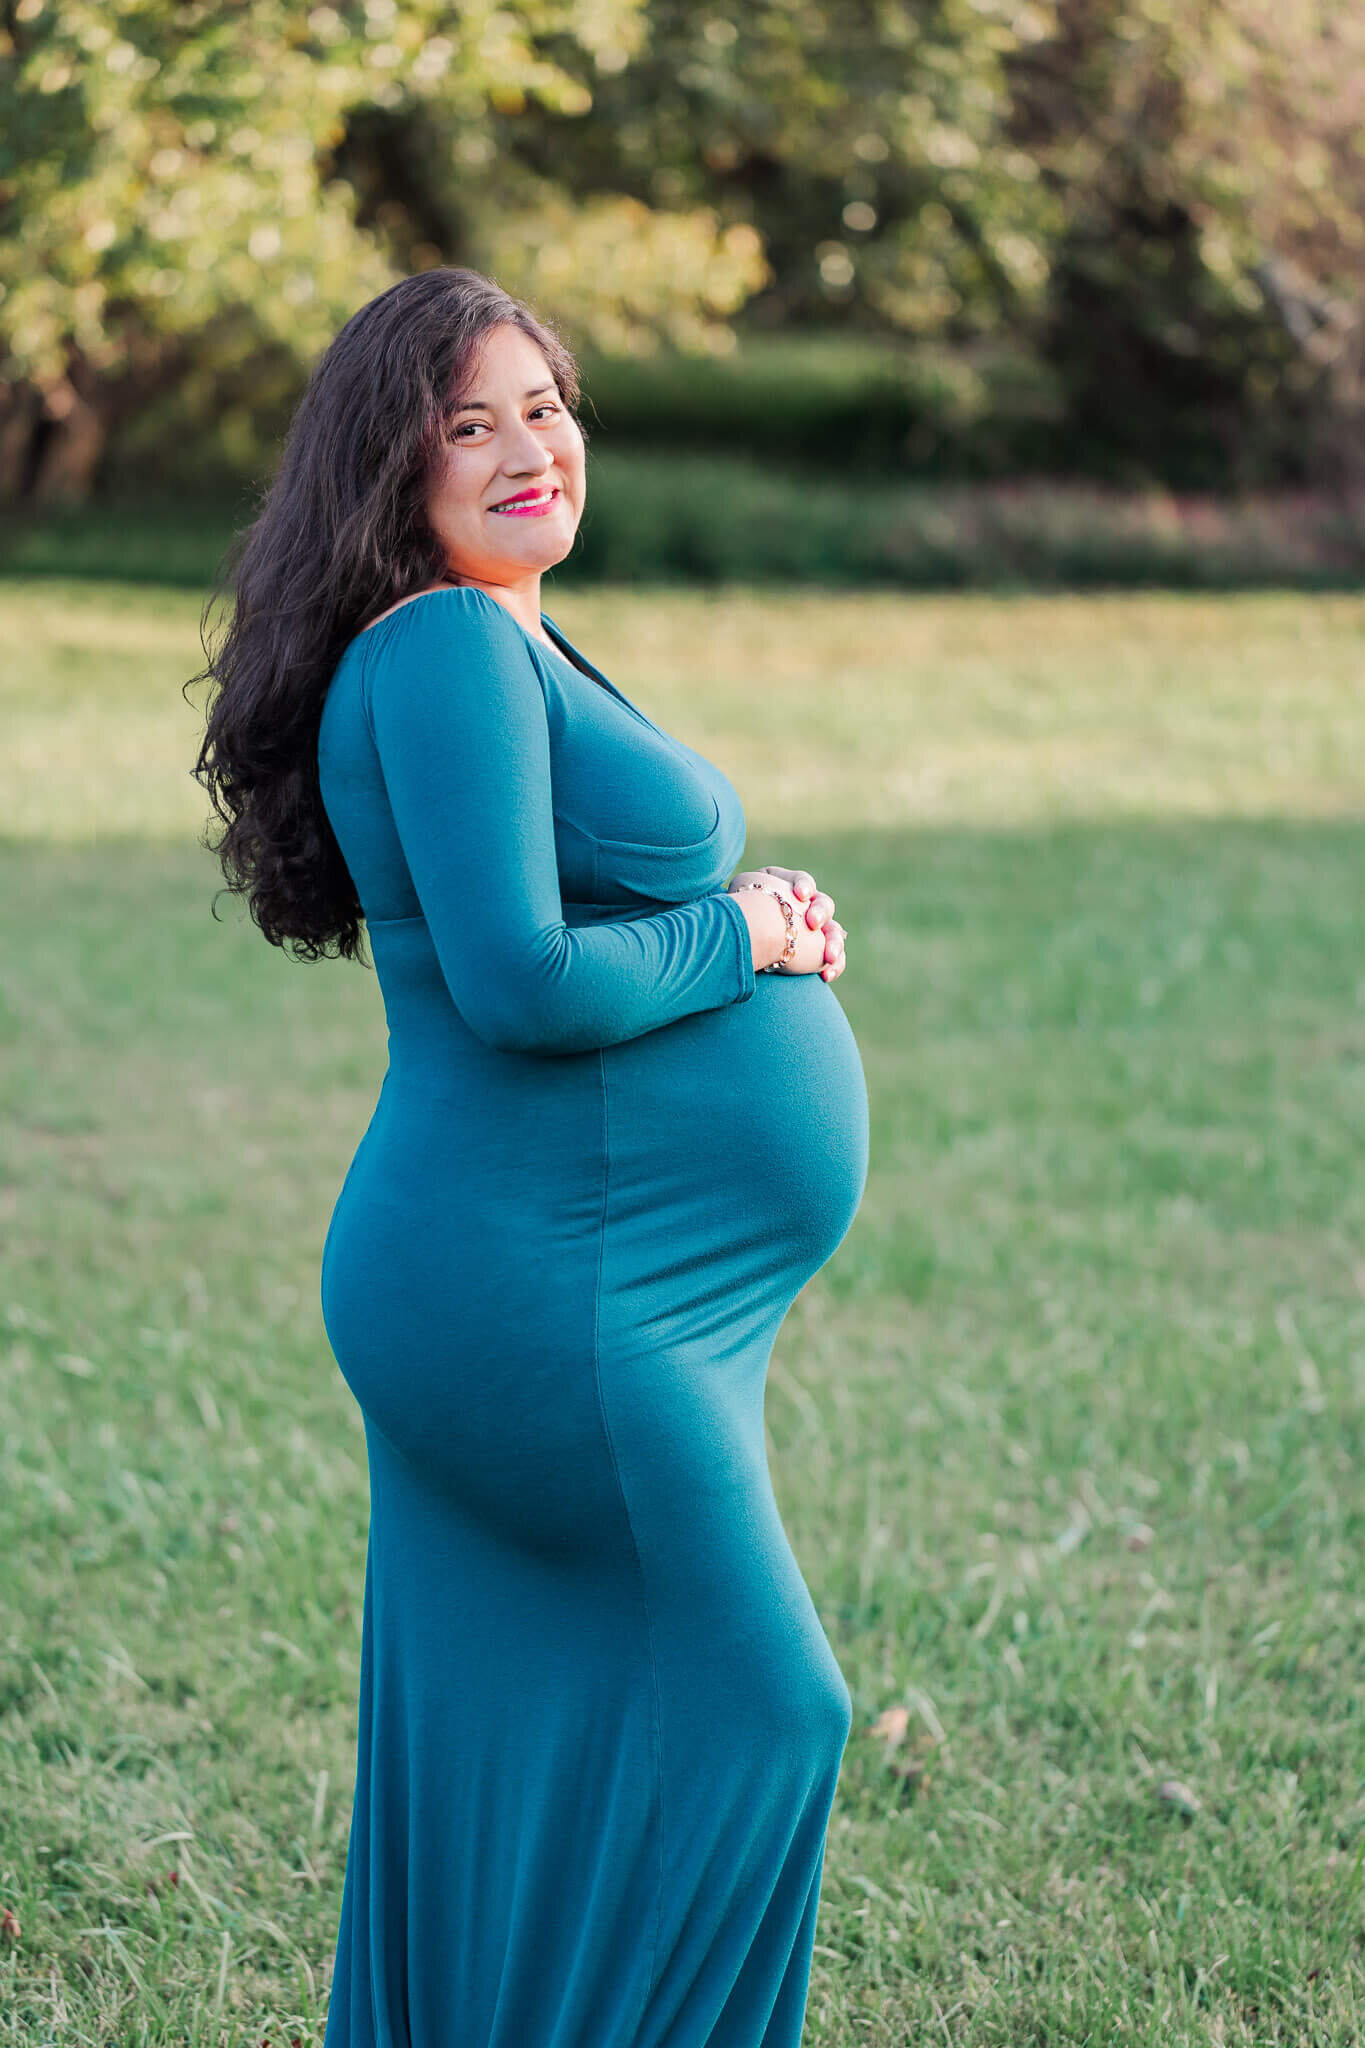 An expecting mother wearing a blue dress for her Burke maternity session.